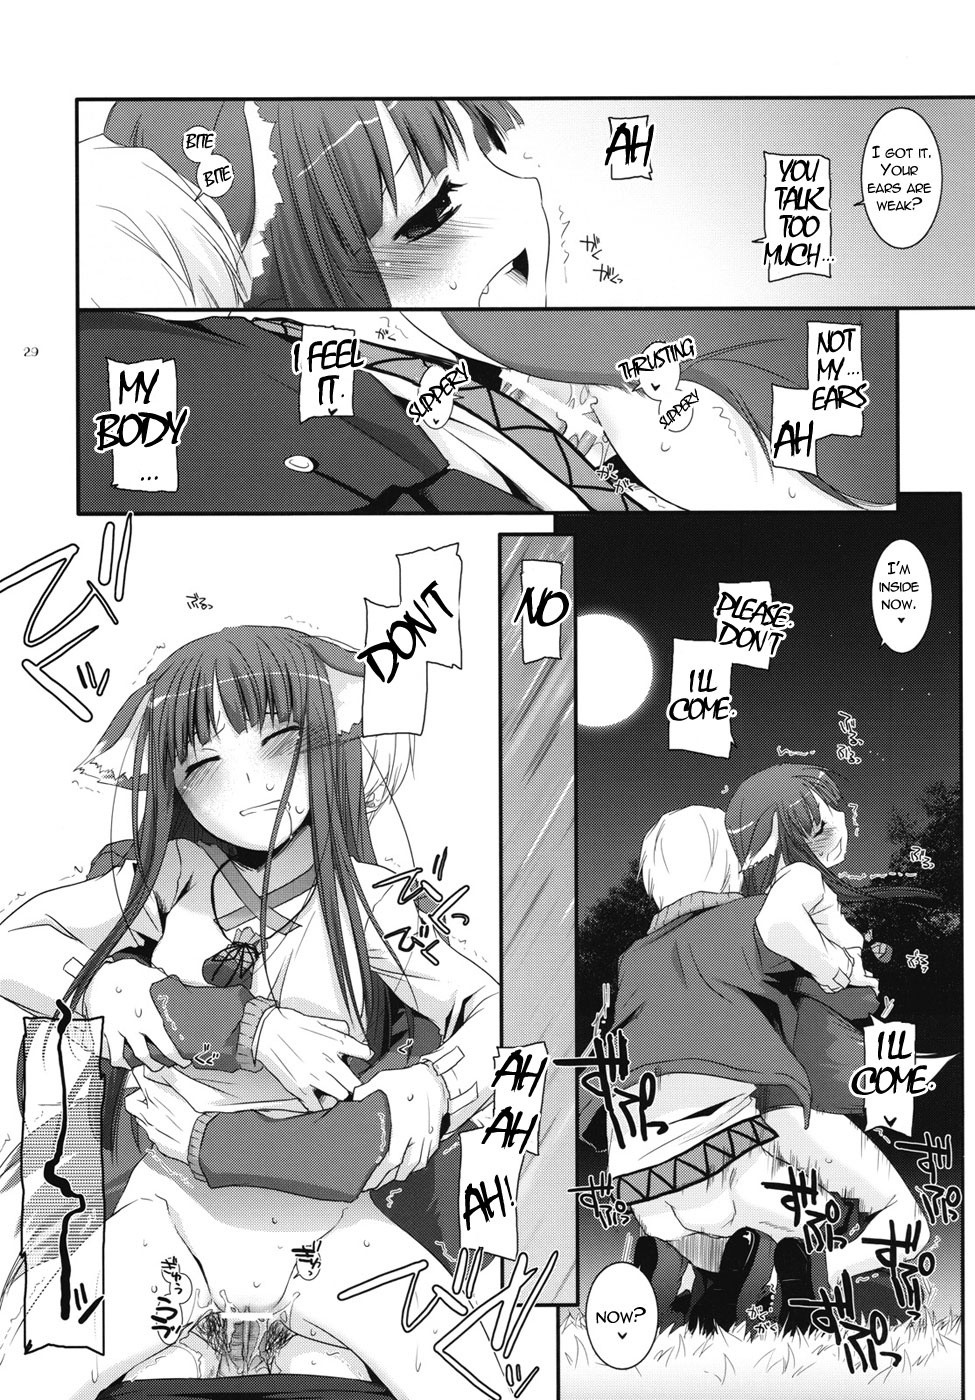 D.L. action 43 hentai manga picture 26